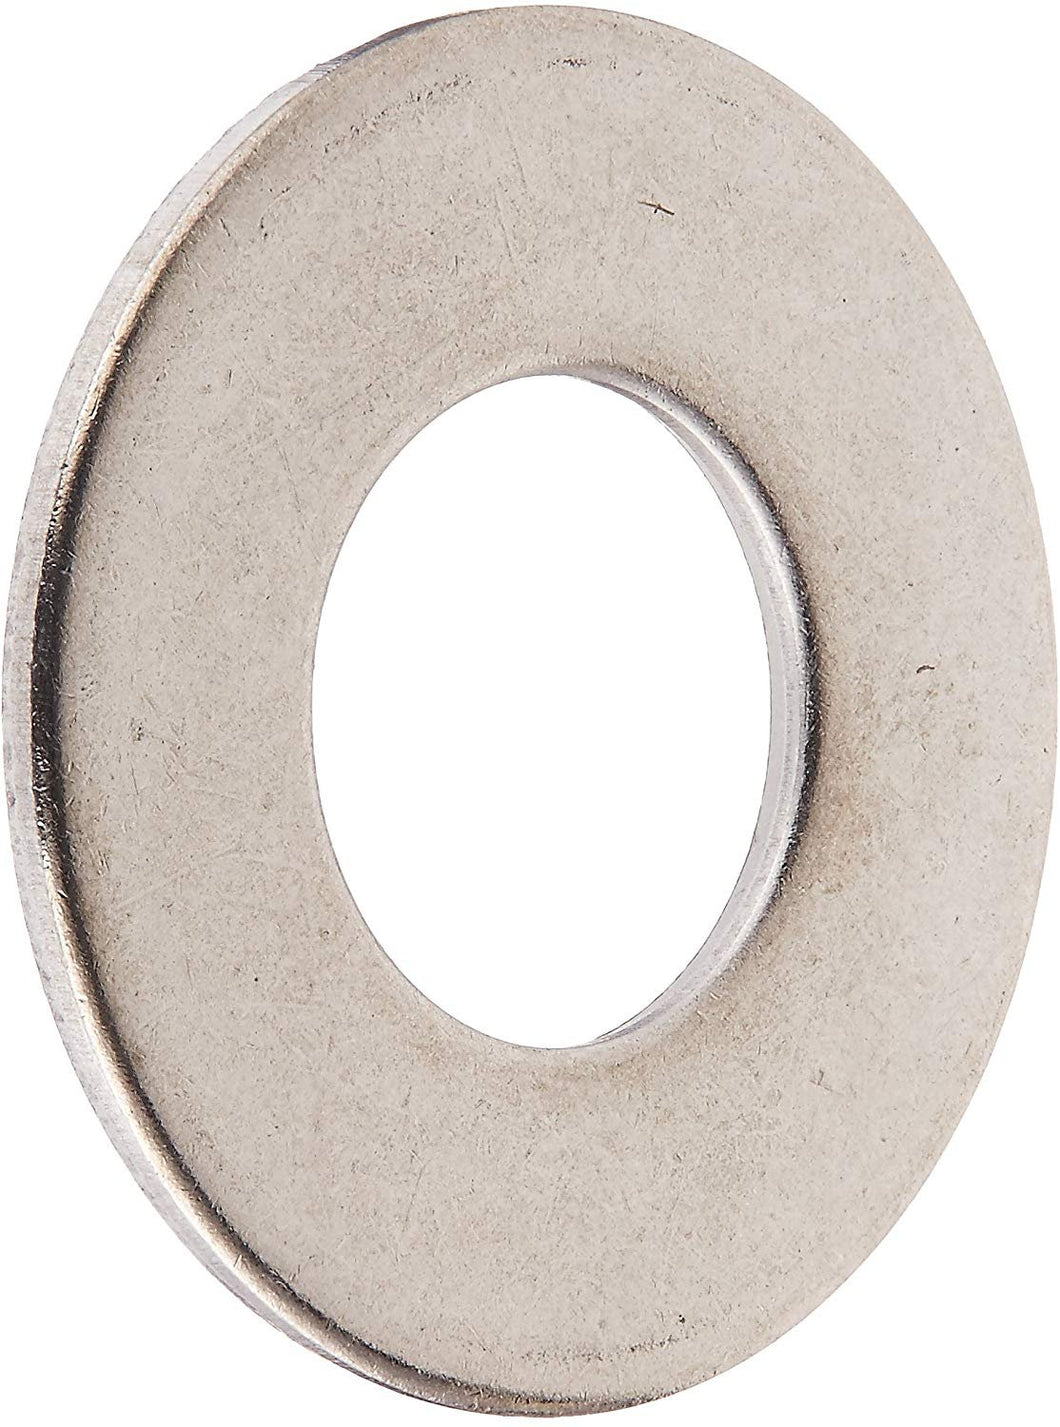 Hillman 830506 Stainless Steel 3/8-Inch Flat Washers, 100-Pack, Single